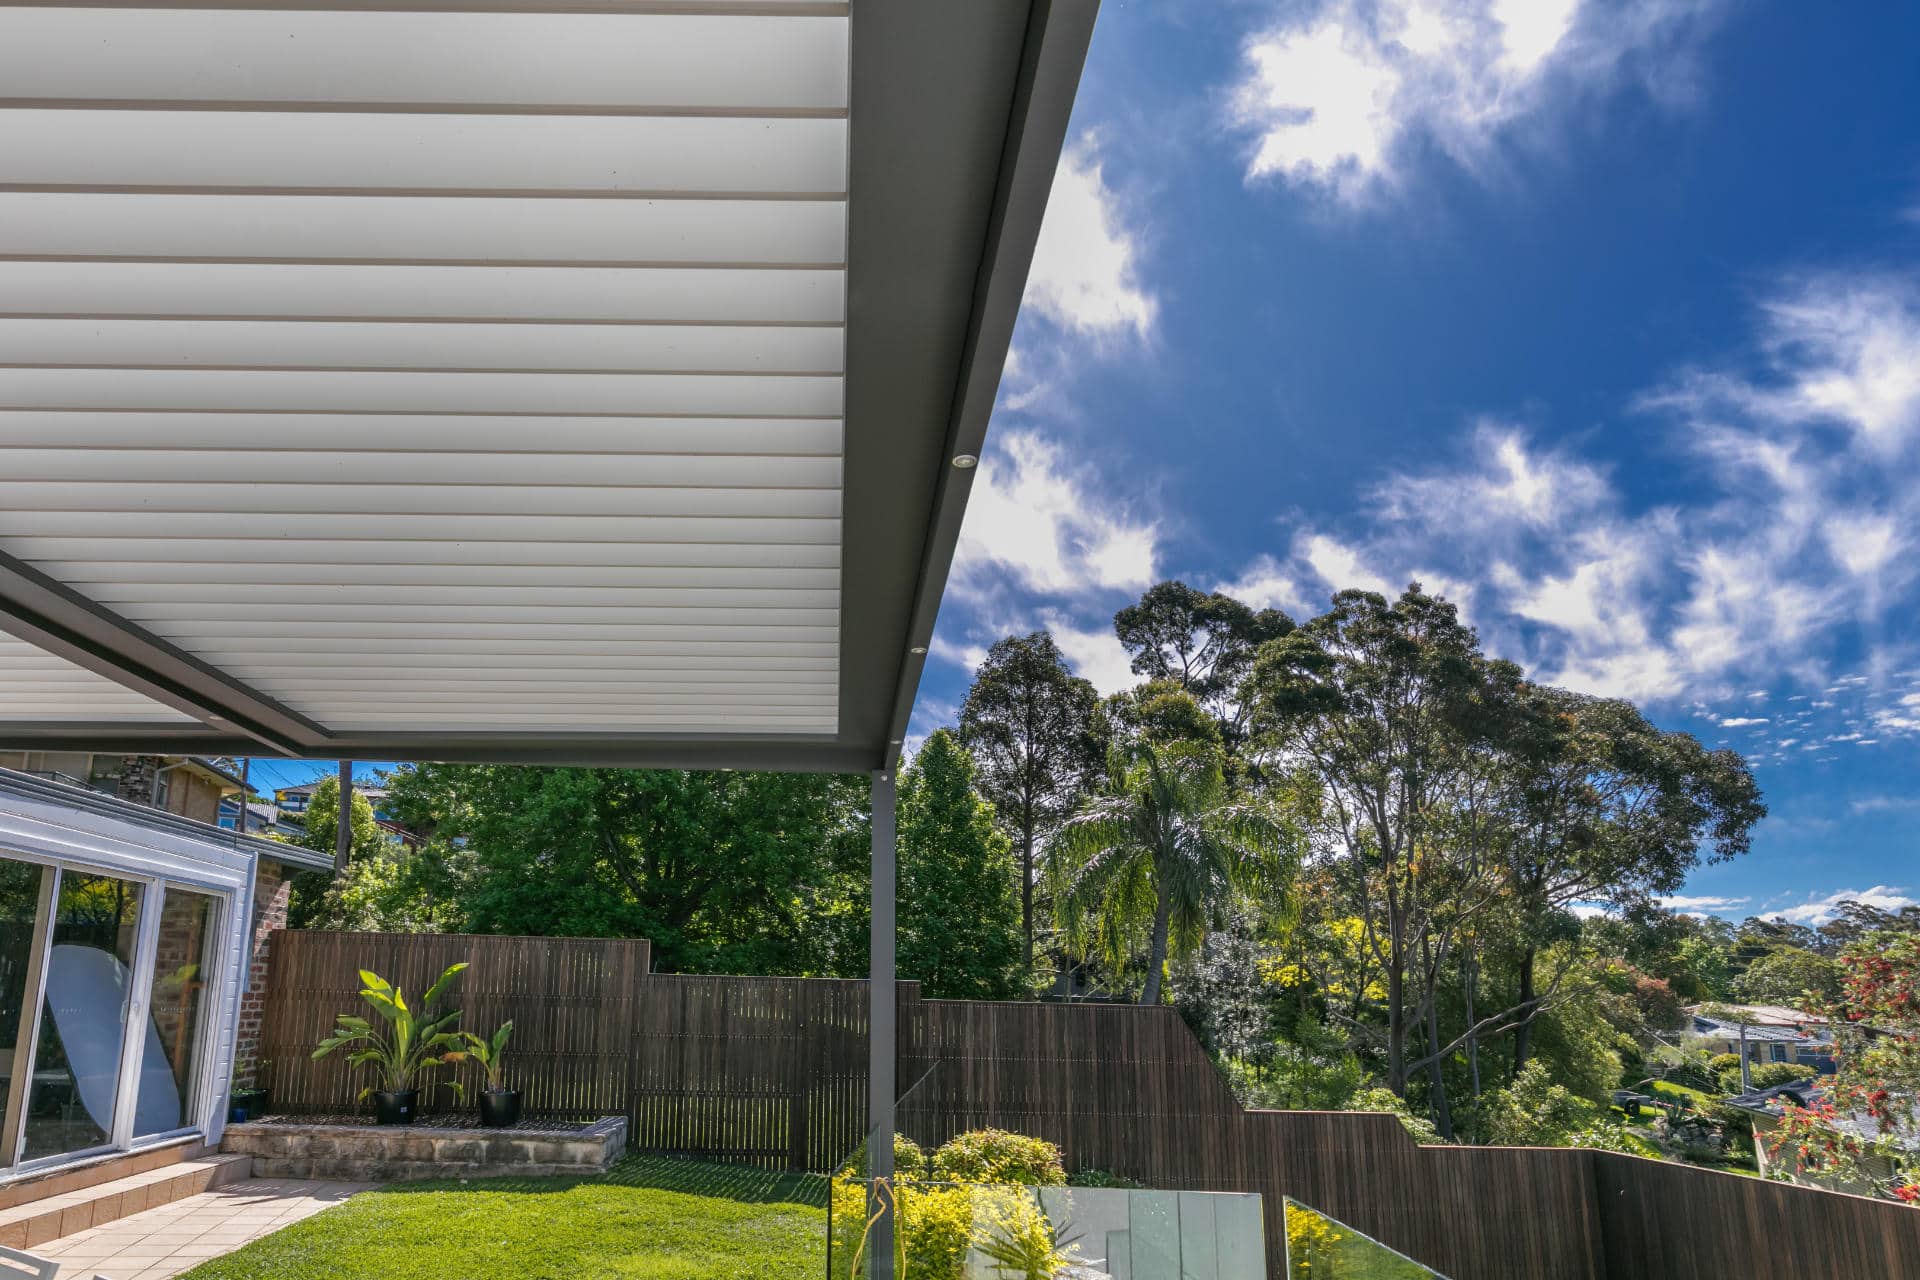 Close up of louvres on Frenchs Forest pergola during the day.